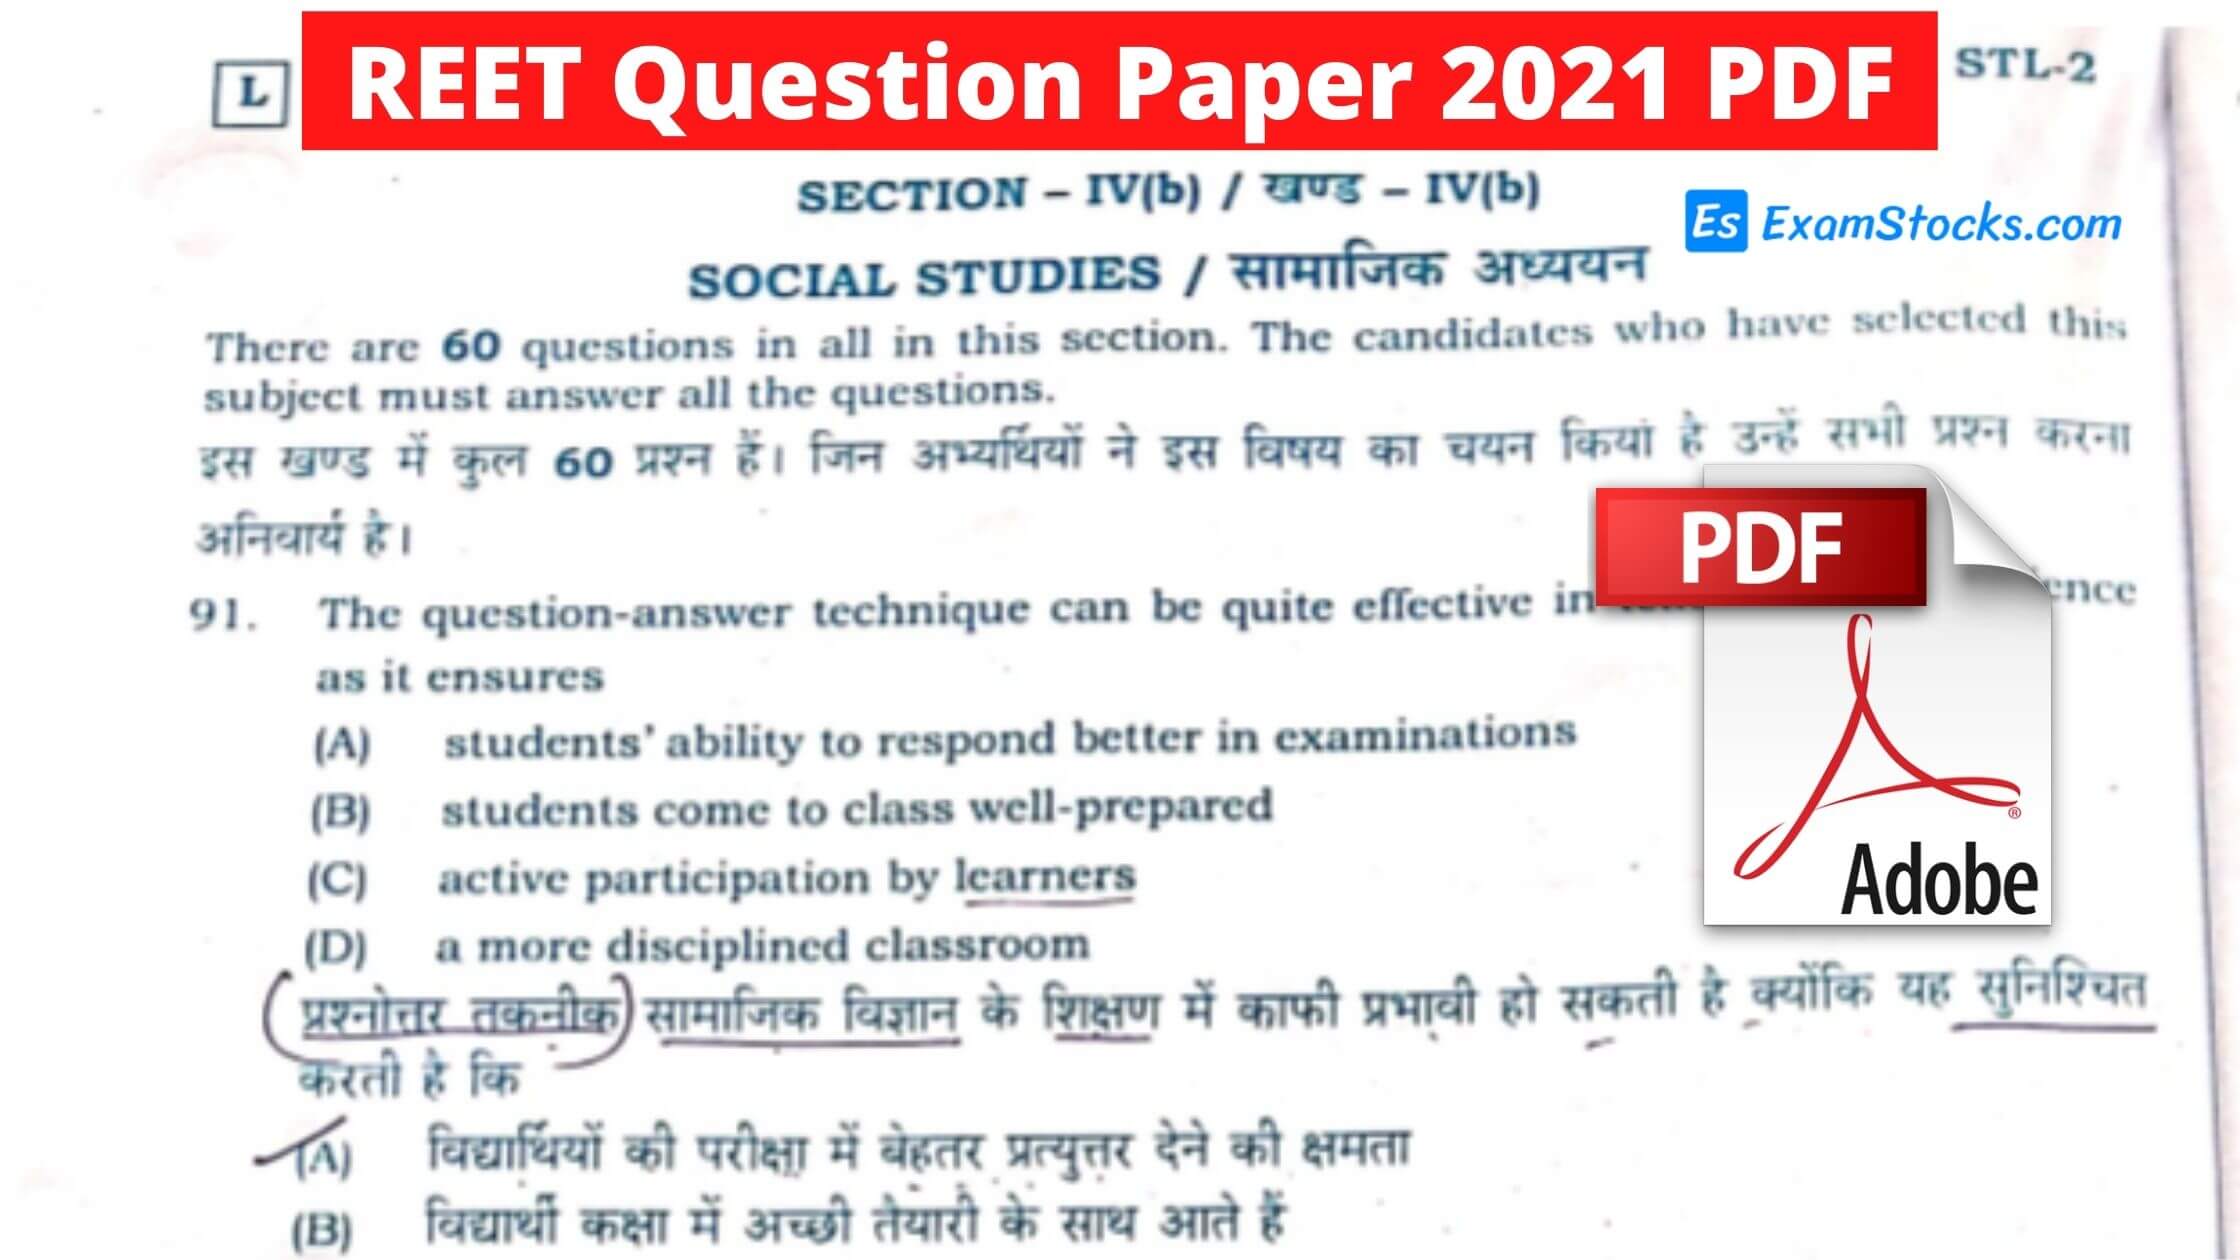 REET 2021 Question Papers PDF Archives - Exam Stocks